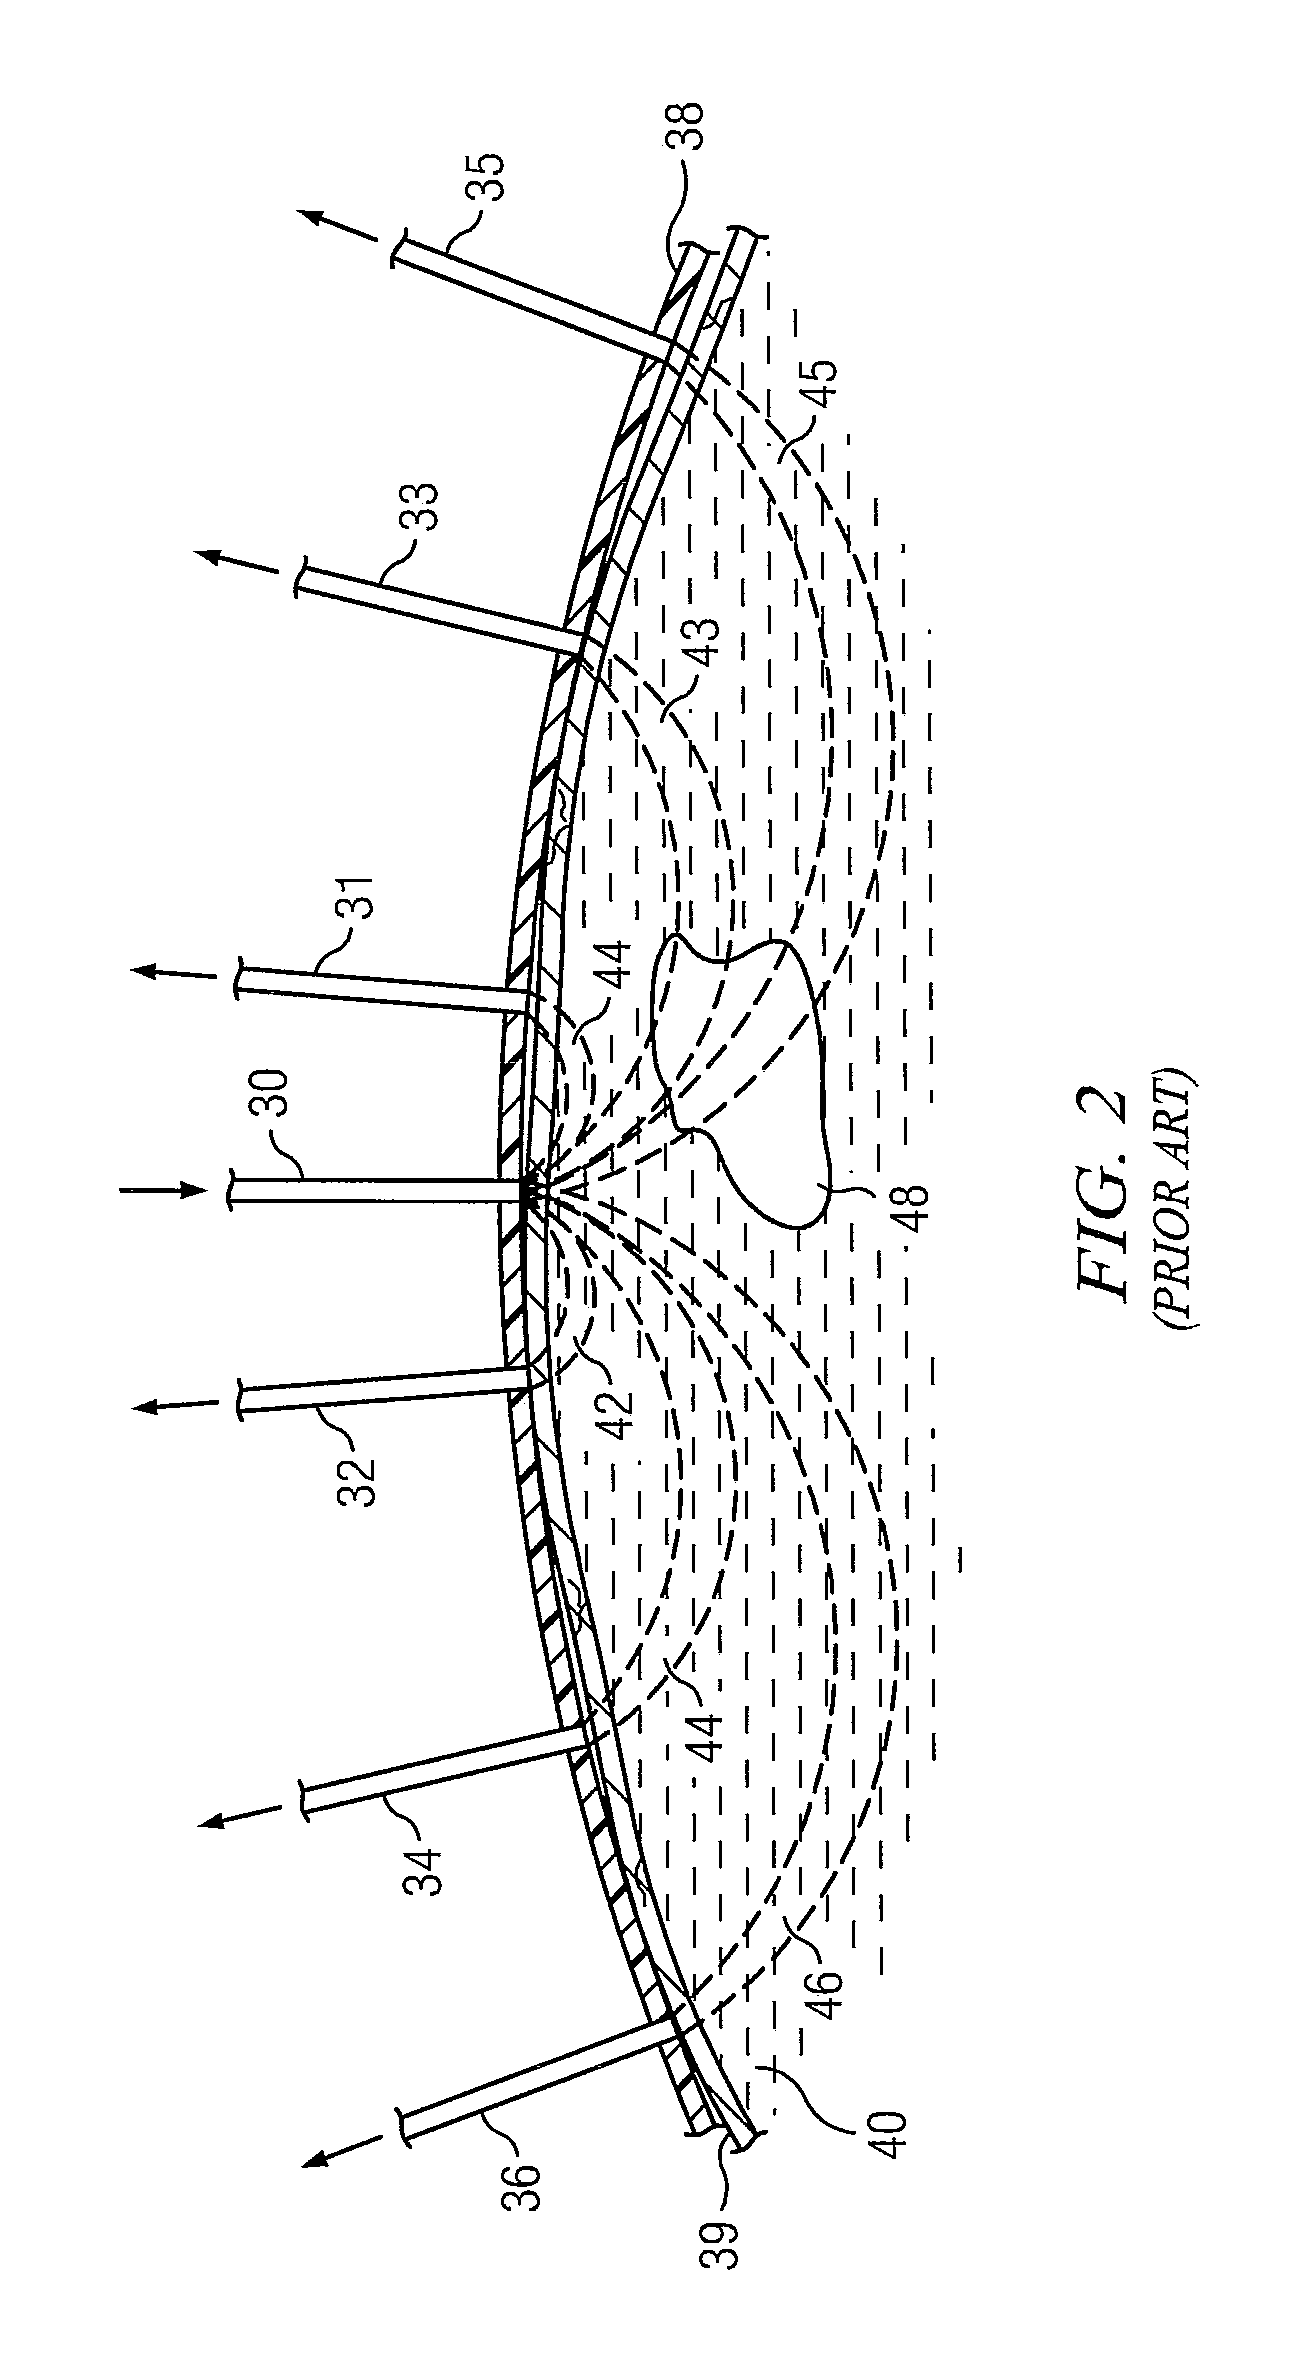 Functional Near Infrared Spectroscopy Imaging System and Method